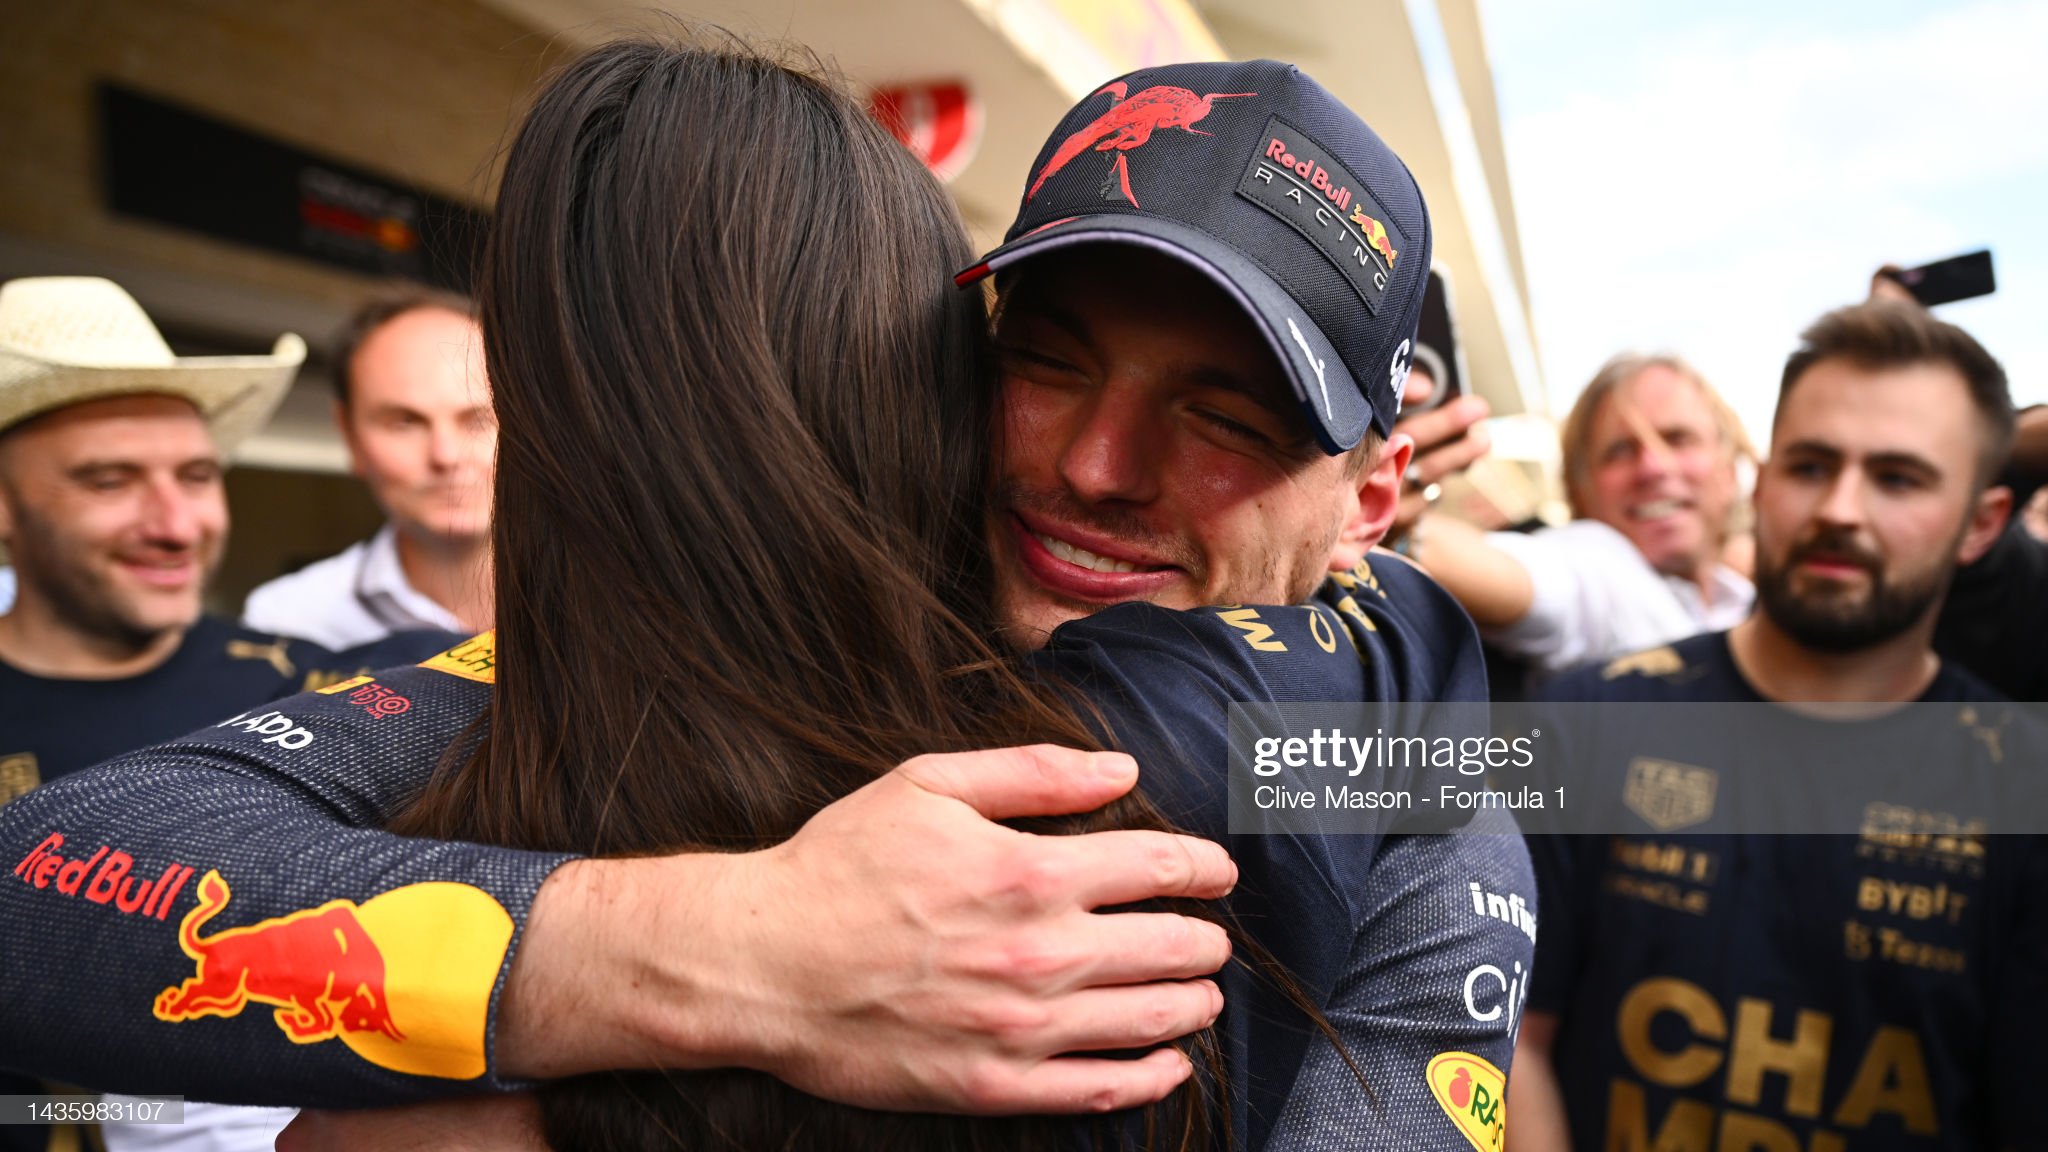 Race winner Max Verstappen celebrates with Kelly Piquet after the F1 Grand Prix of USA.